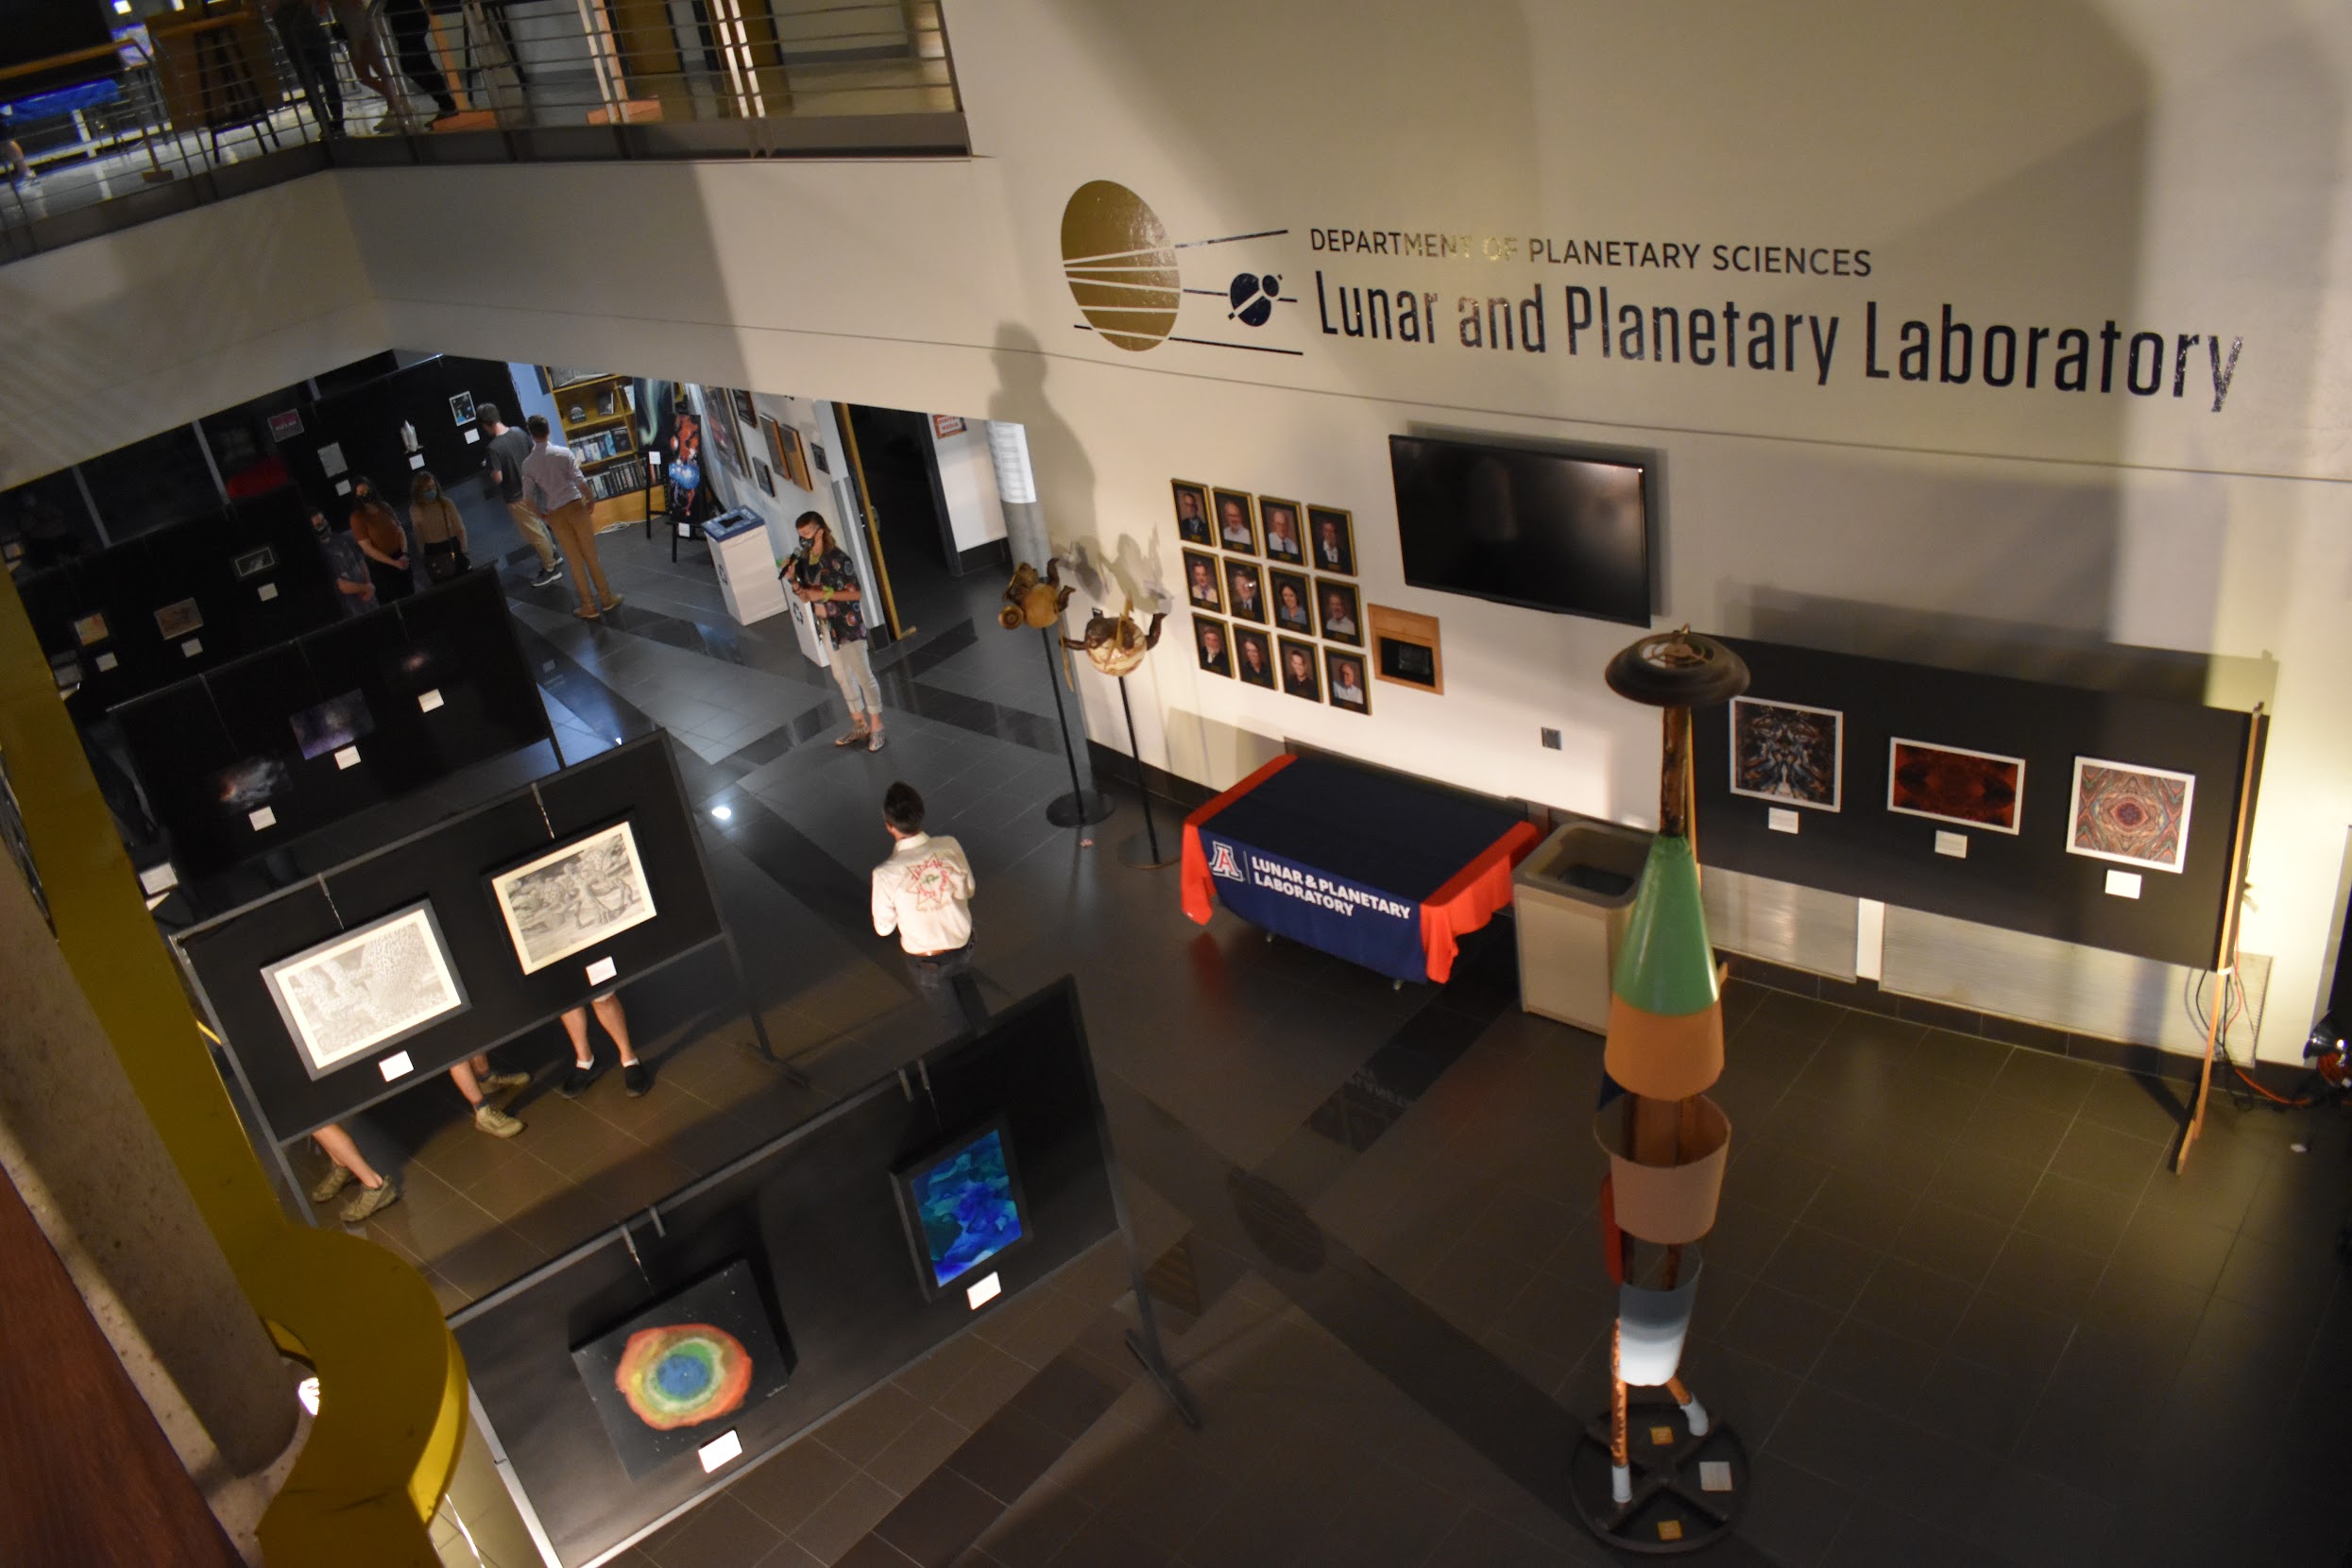 A view from high above several art pieces with the Lunar and Planetary Lab logo featured